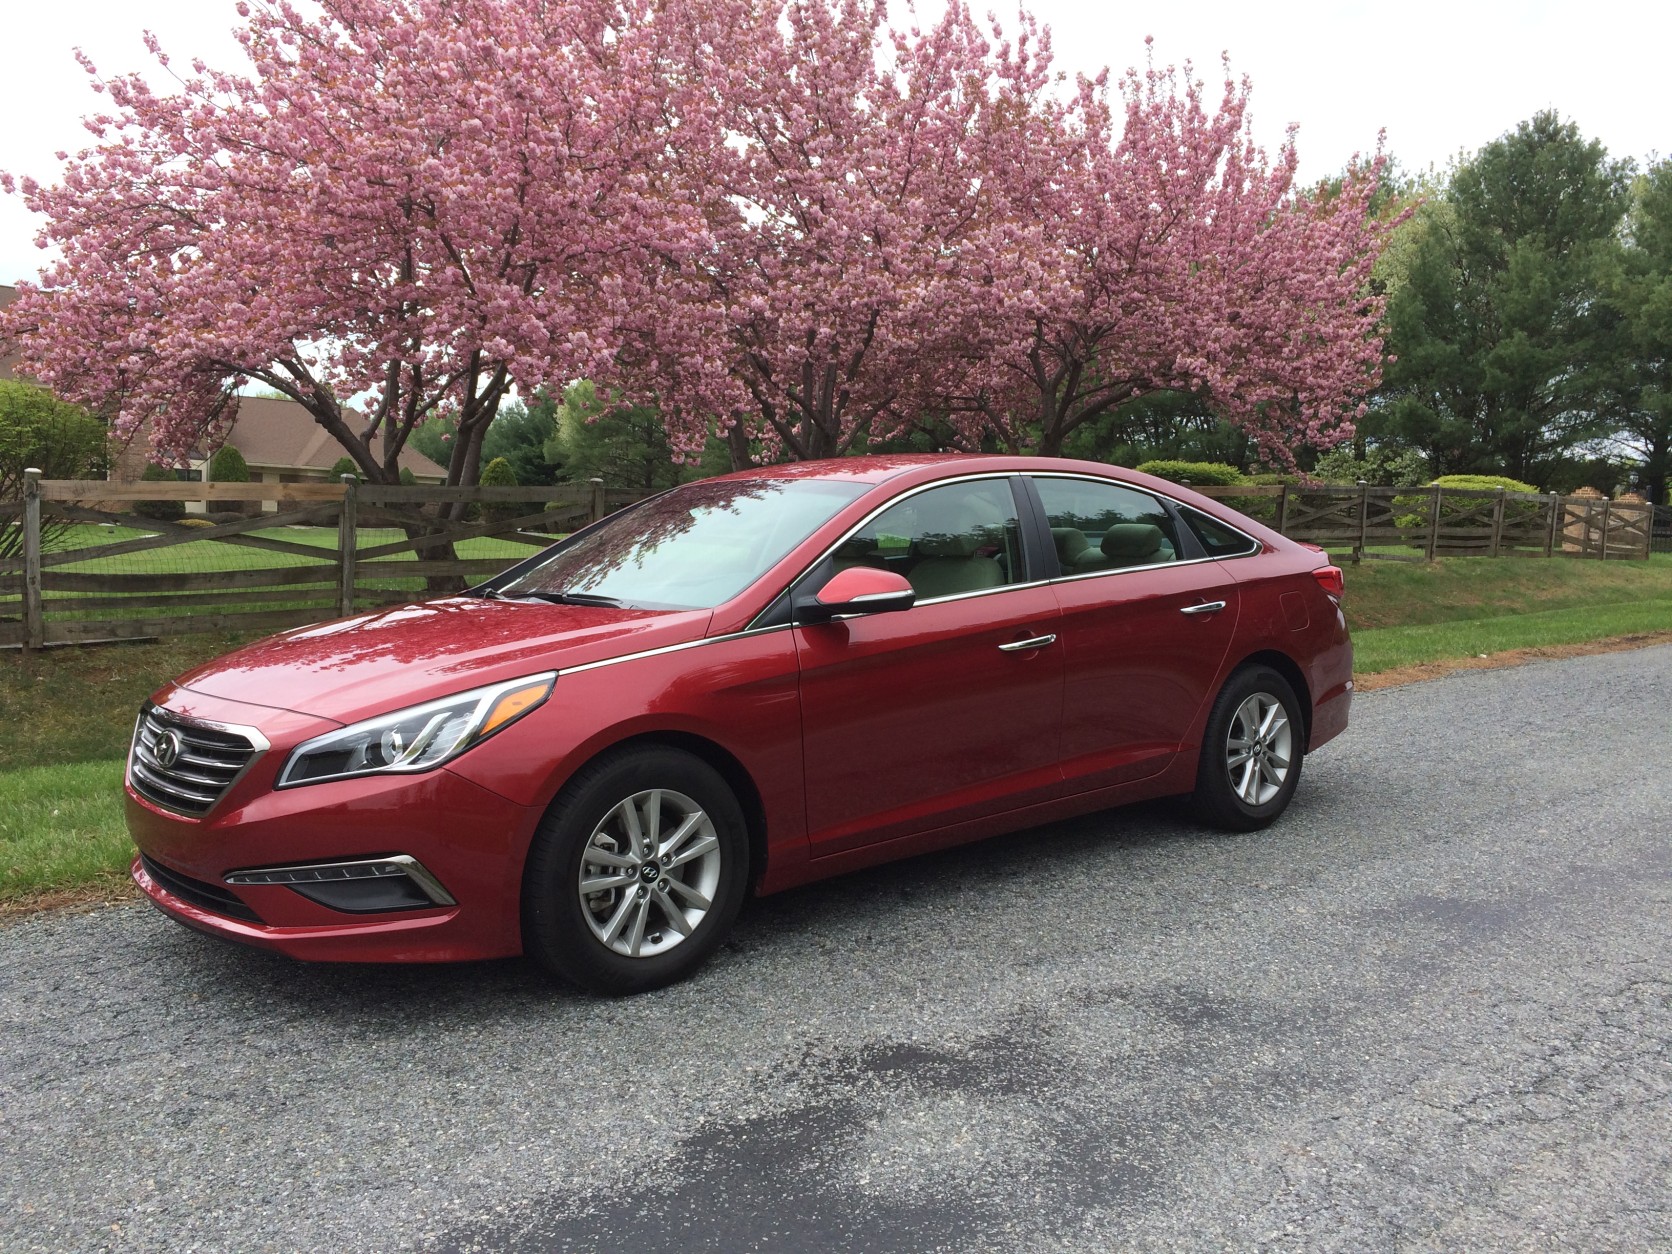  The new Sonata Eco has a starting price of $23,275 (WTOP/Mike Parris).